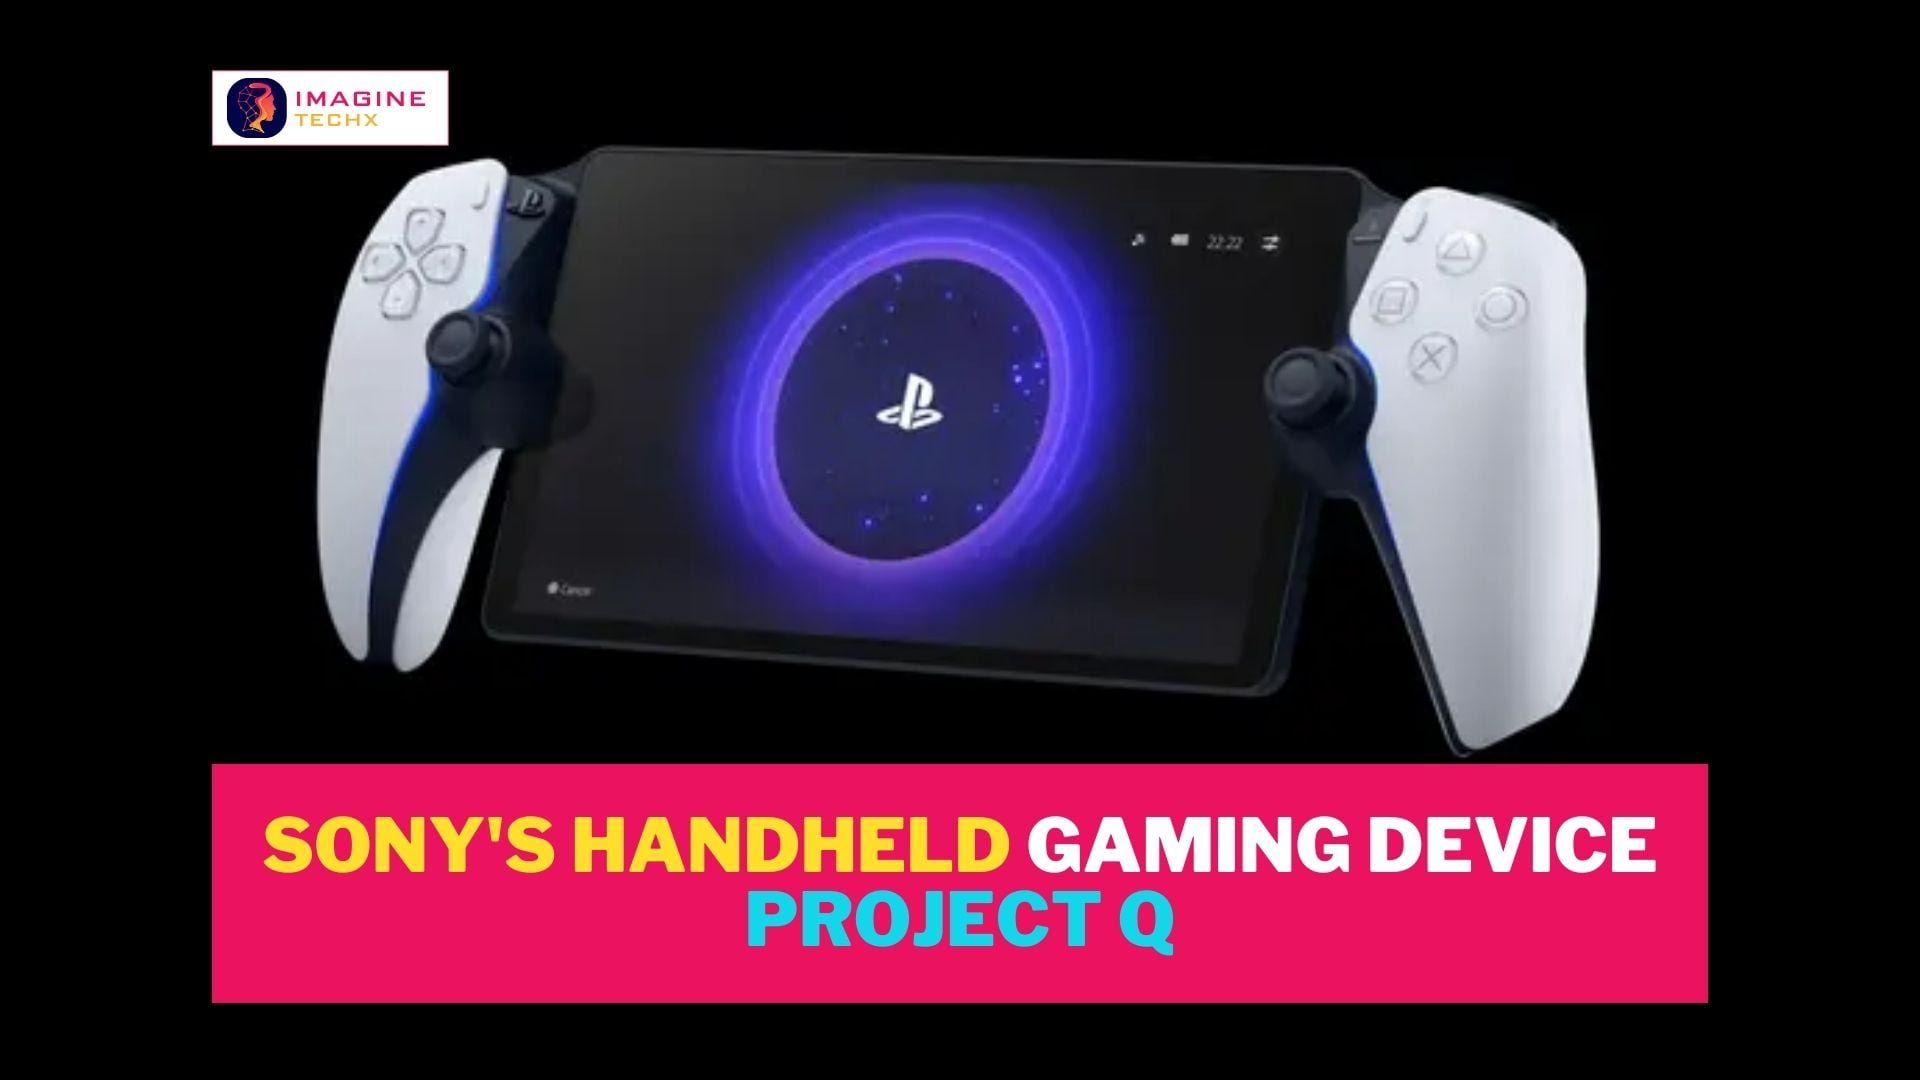 Sony's Handheld Gaming Device Project Q